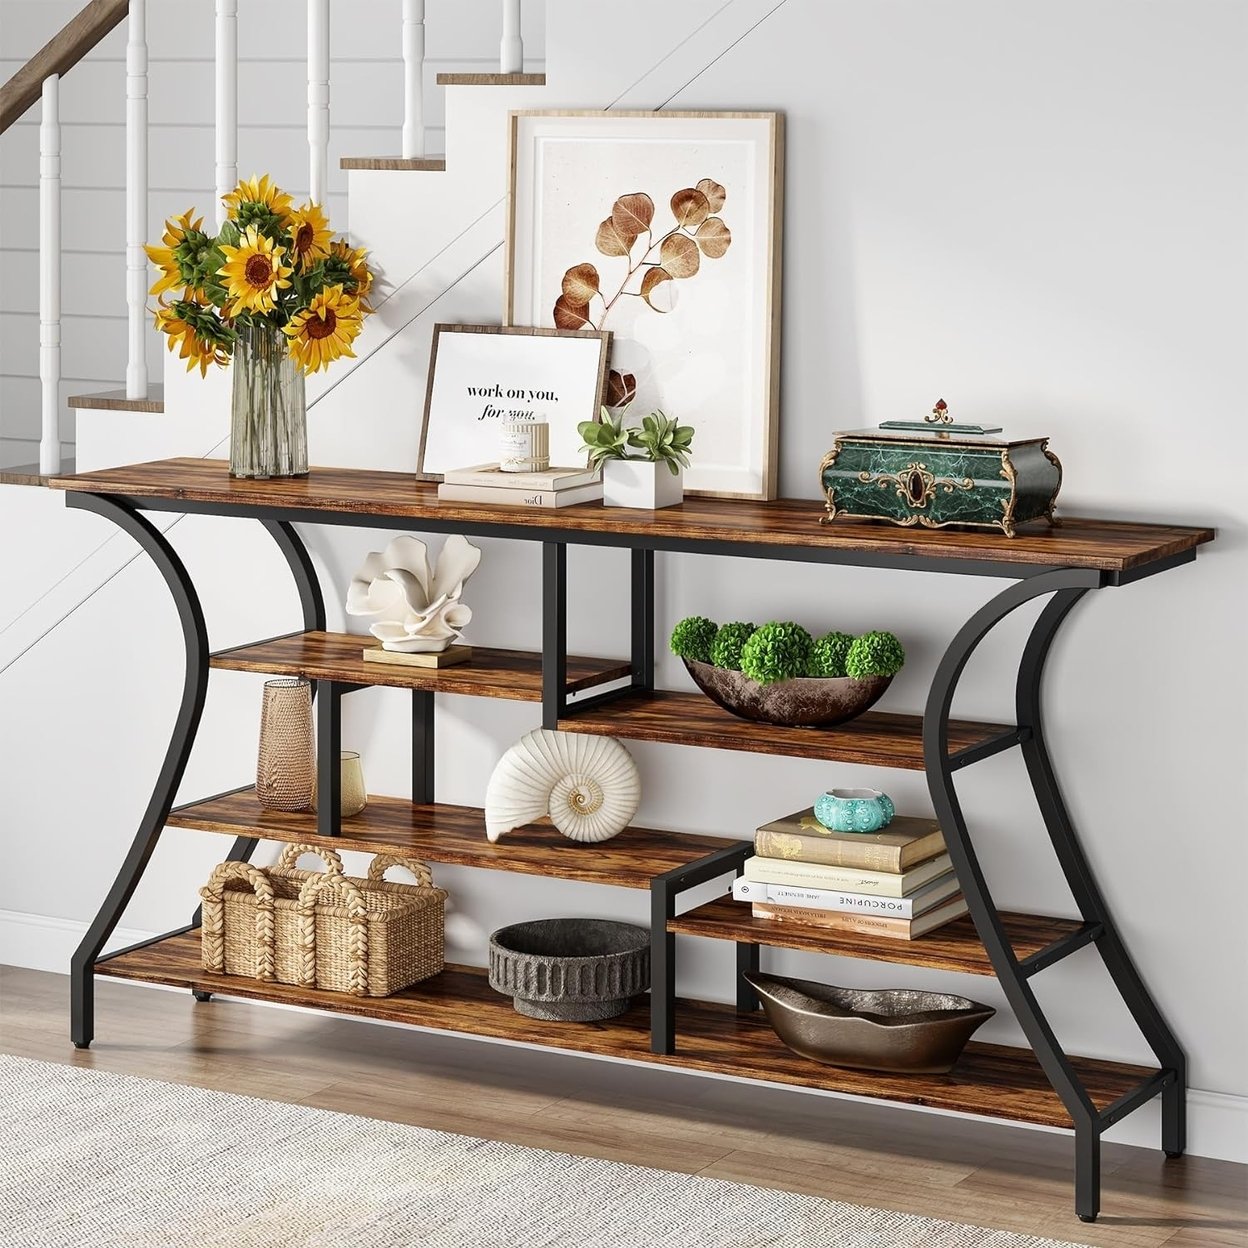 70.9 Extra Long Console Table, Industrial Narrow Sofa Table With Storage Shelves, 4 Tier Entryway Table Behind Couch - Rustic Brown